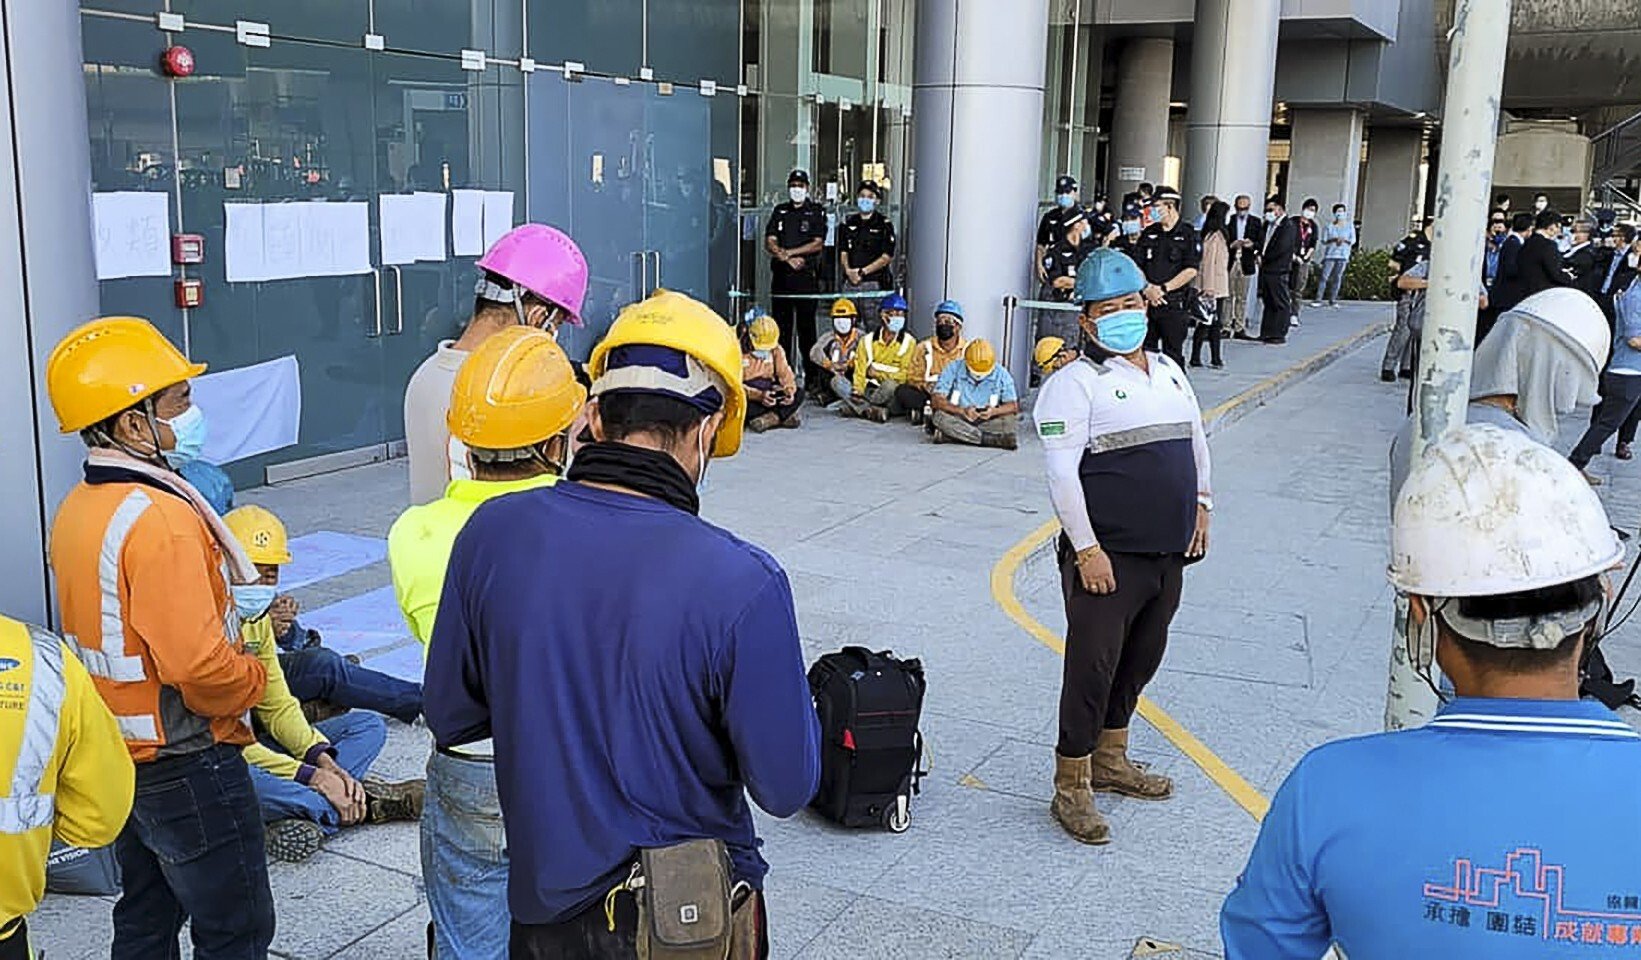 Workers involved in building a new terminal for Hong Kong International Airport’s planned third runway stage a protest on Tuesday. Photo: Facebook